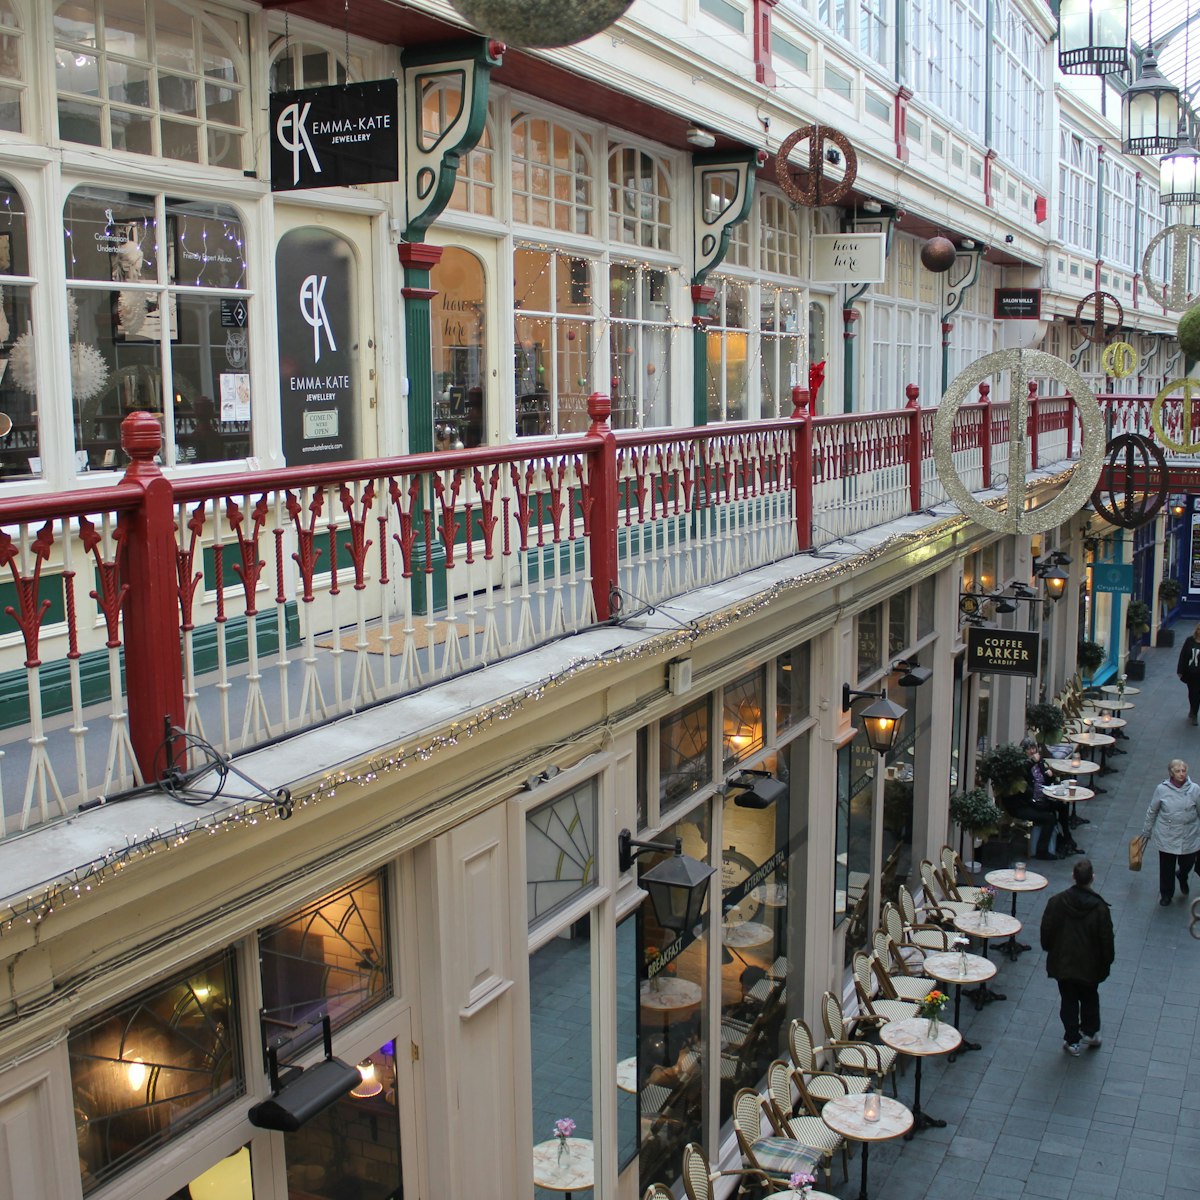 One of Cardiff's many Victorian and Edwardian arcades